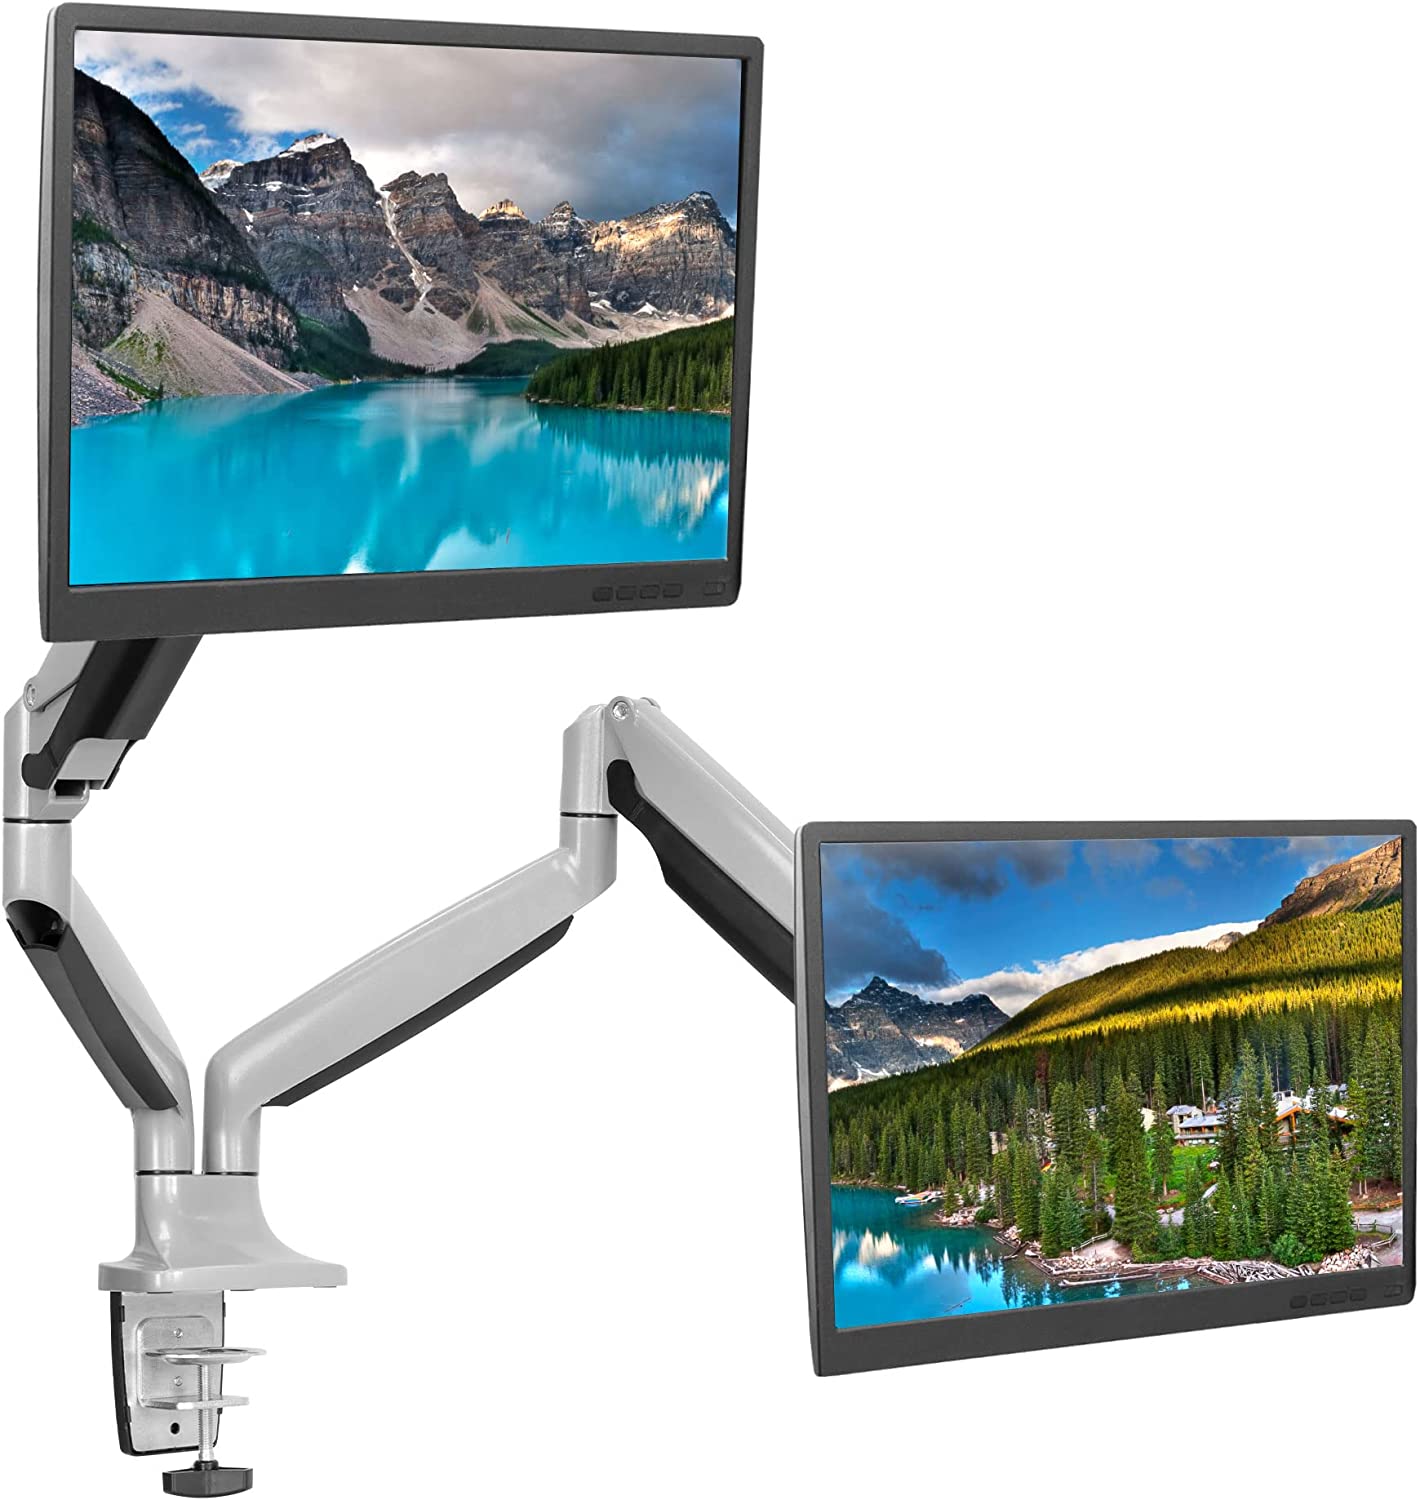 Mount-It! (MI-1772) Dual Monitor Arm Mount Desk Stand Two Articulating Gas Spring Height Adjustable Arms | Fits Up To 32" VESA 75 100 Compatible Screens | C-Clamp and Grommet Bases (Silver).